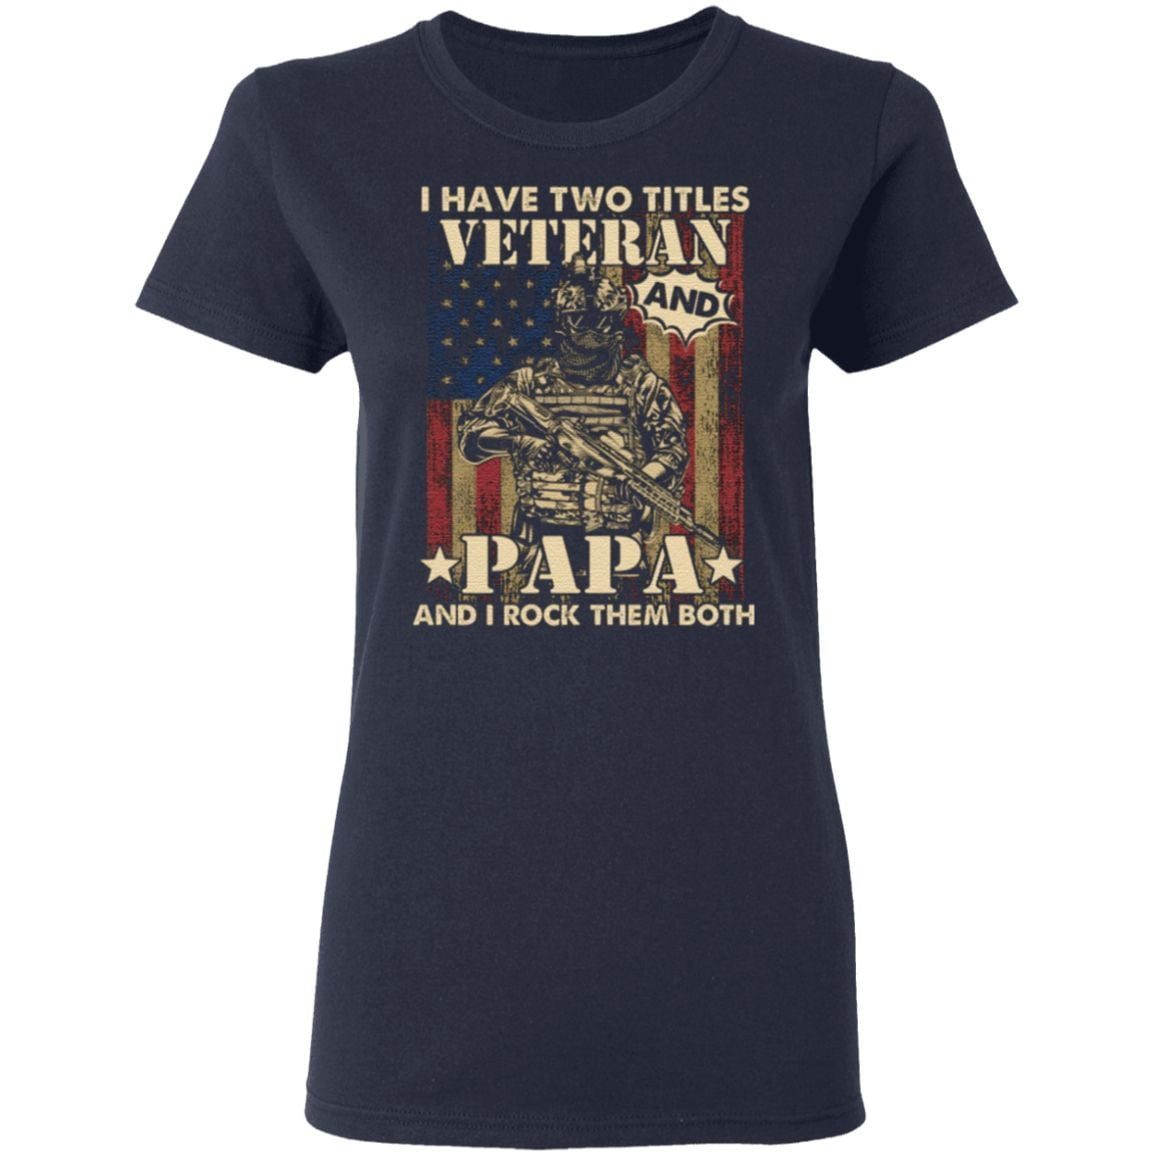 I Have Two Titles Veteran And Papa And I Rock Them Both T-Shirt